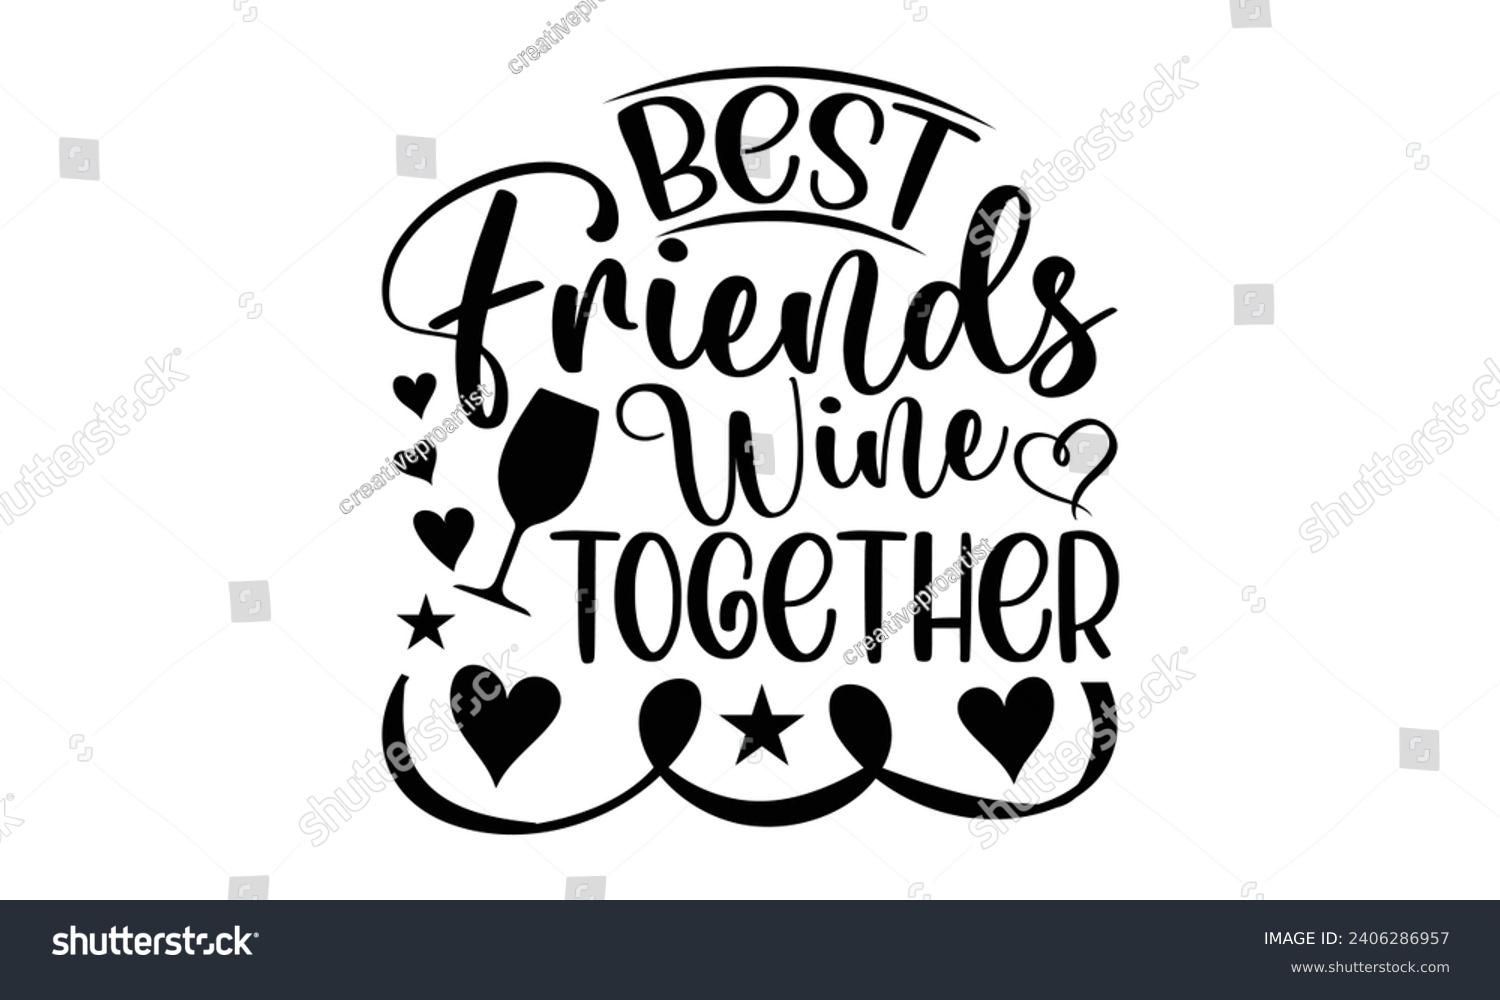 SVG of Best Friends Wine Together- Best friends t- shirt design, Hand drawn vintage illustration with hand-lettering and decoration elements, greeting card template with typography text svg